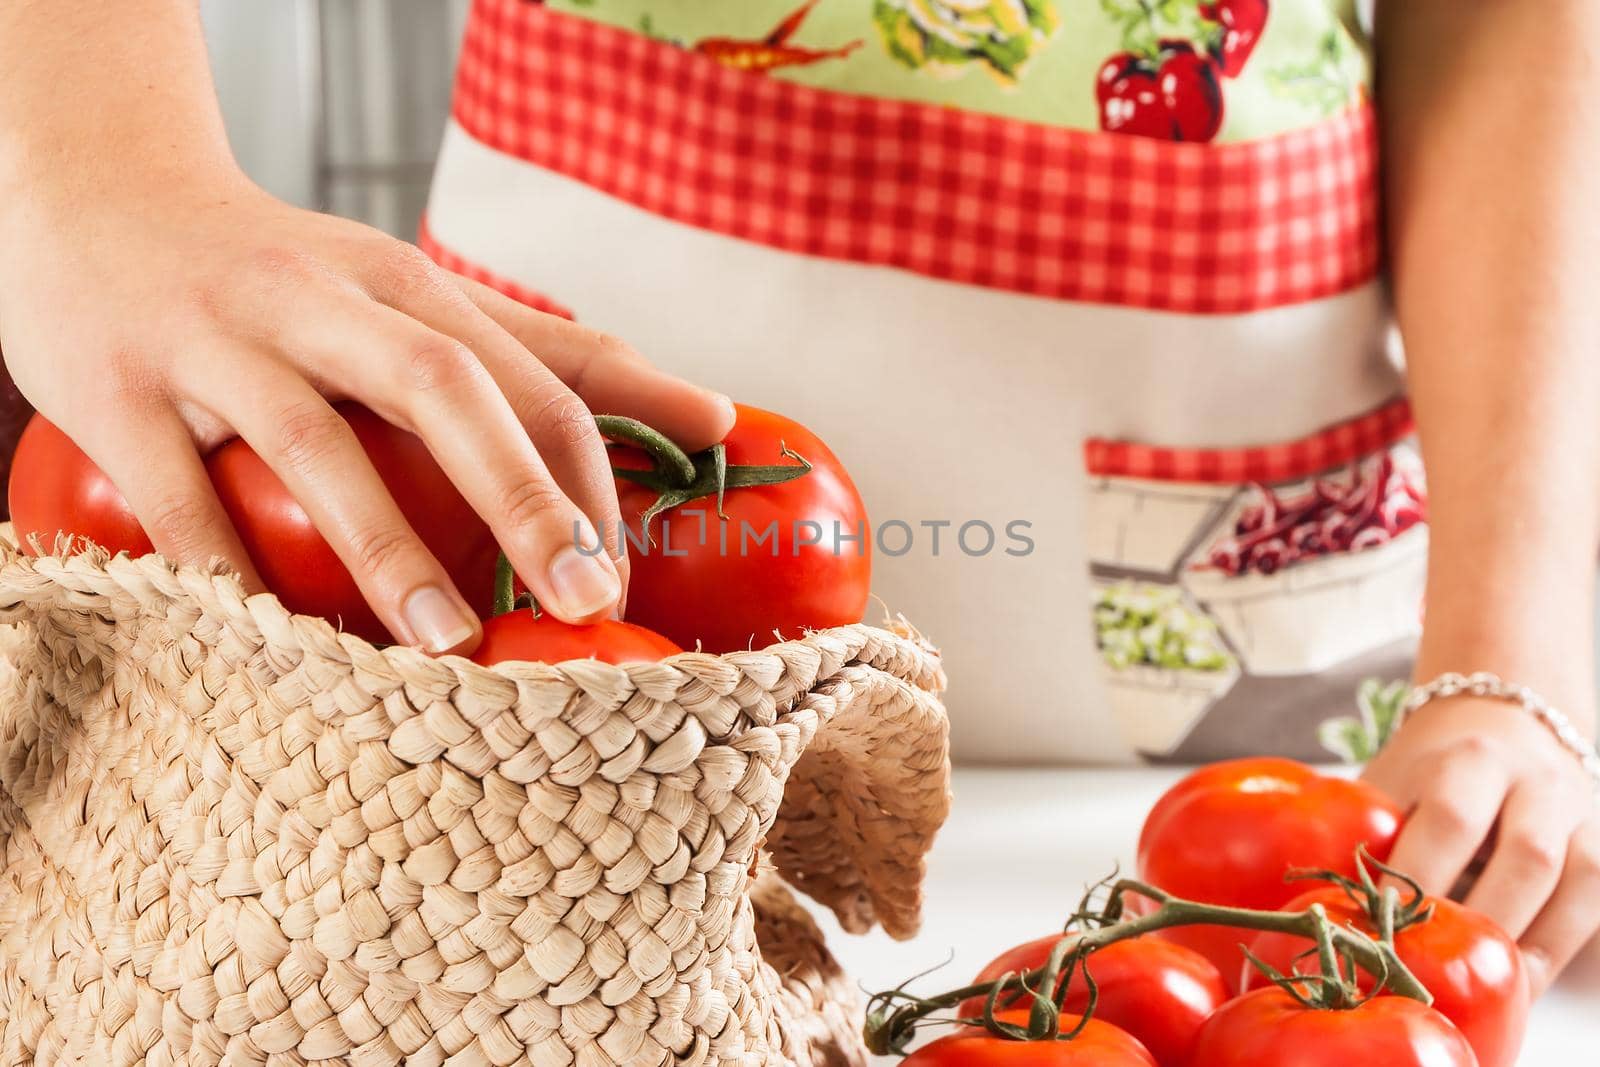 Woman with an apron picking tomatoes